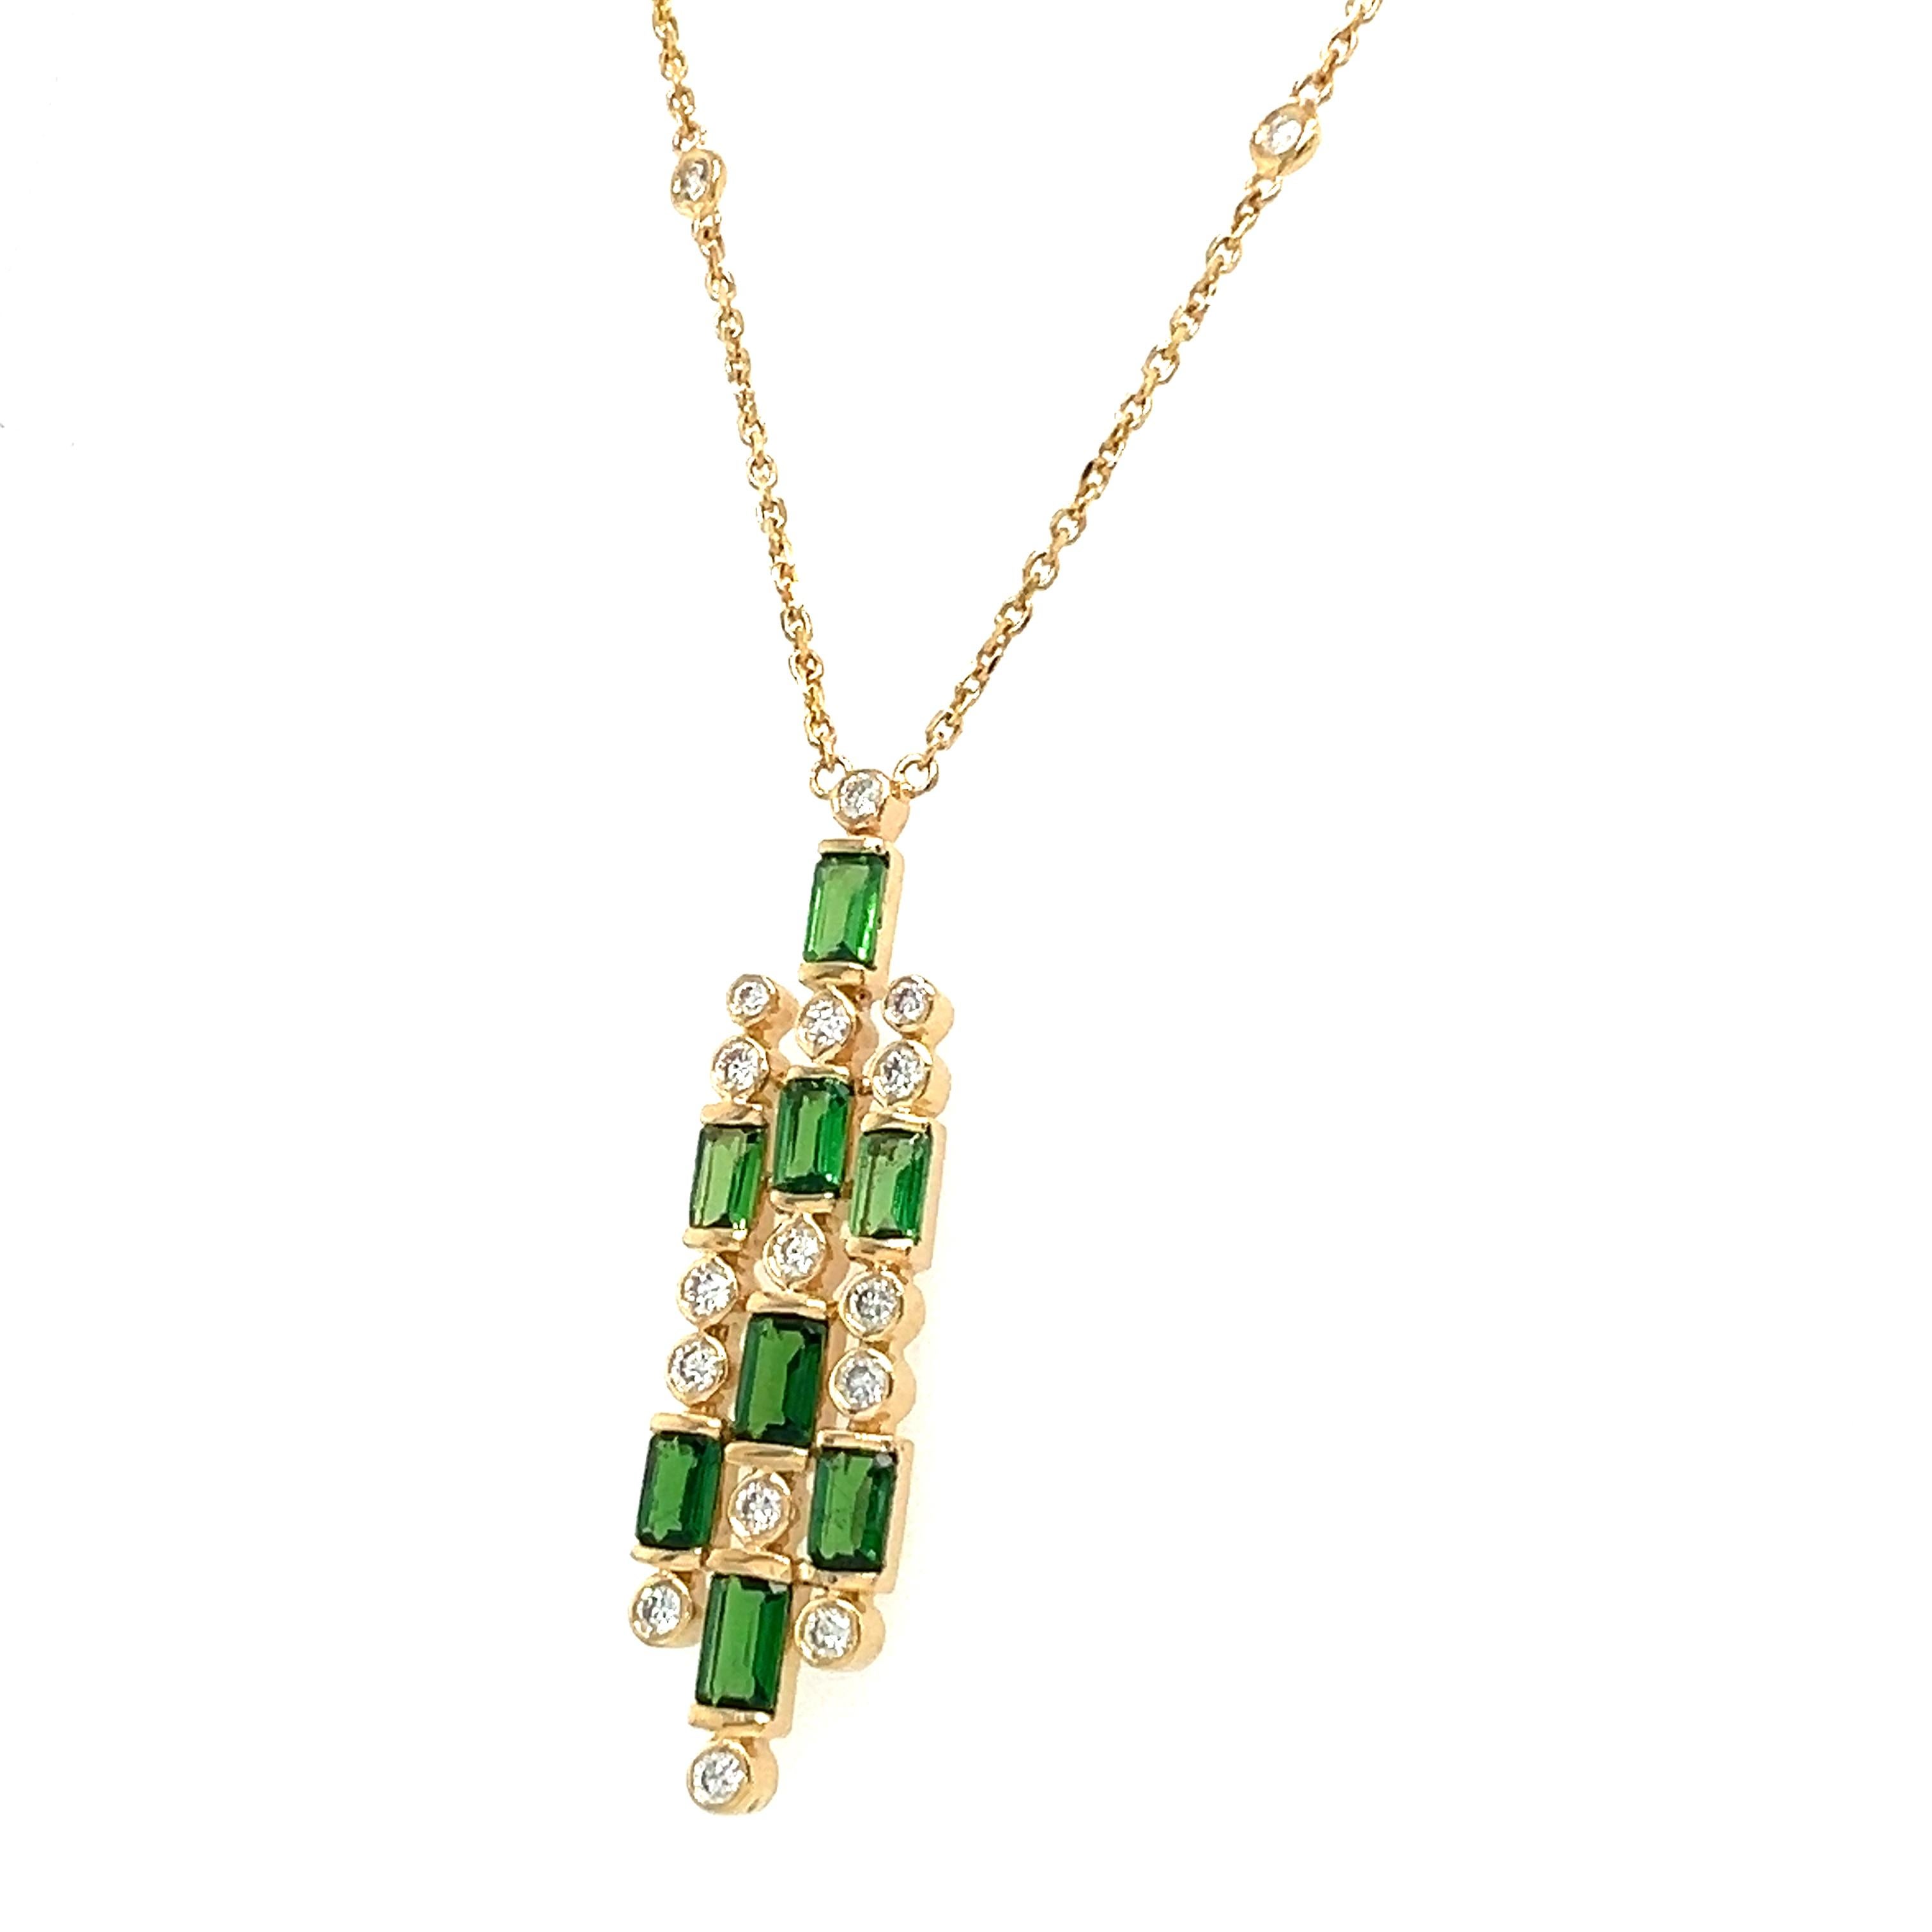  18 Kt gold natural Tsavorite and diamond necklace For Sale 2